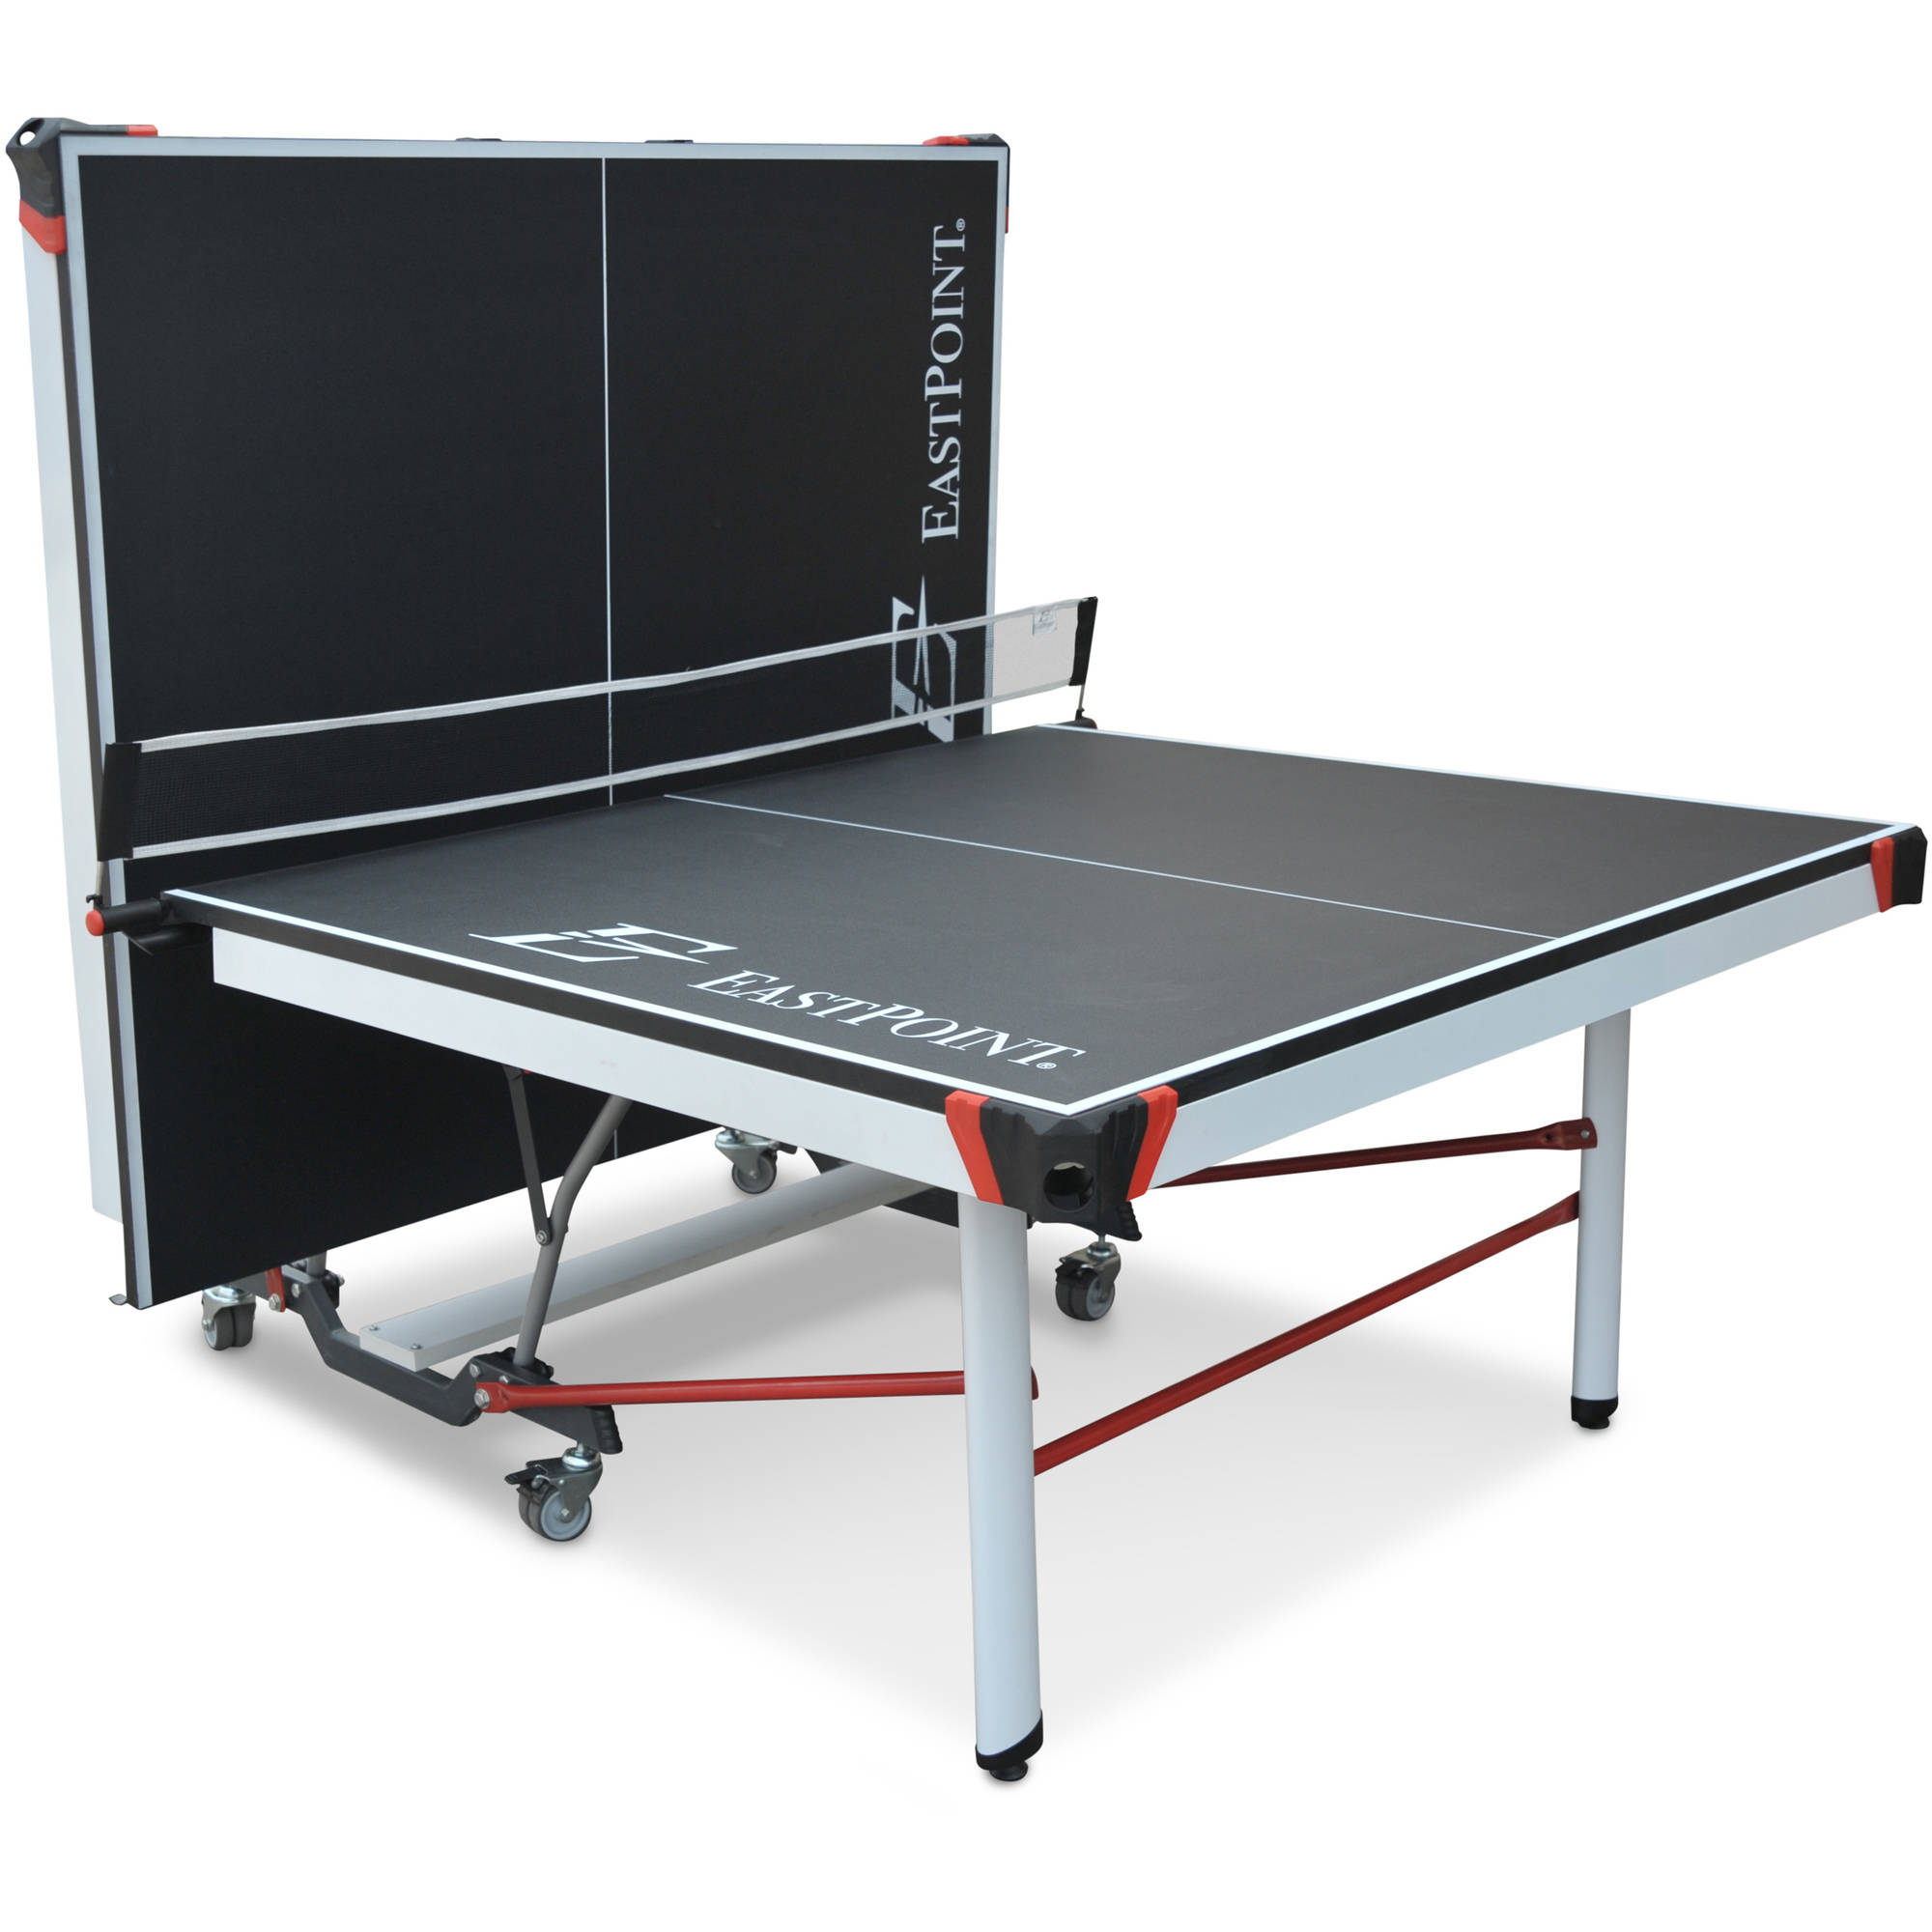 EastPoint Sports EPS 5000 2-Piece Table Tennis Table - 25mm Top - image 4 of 5